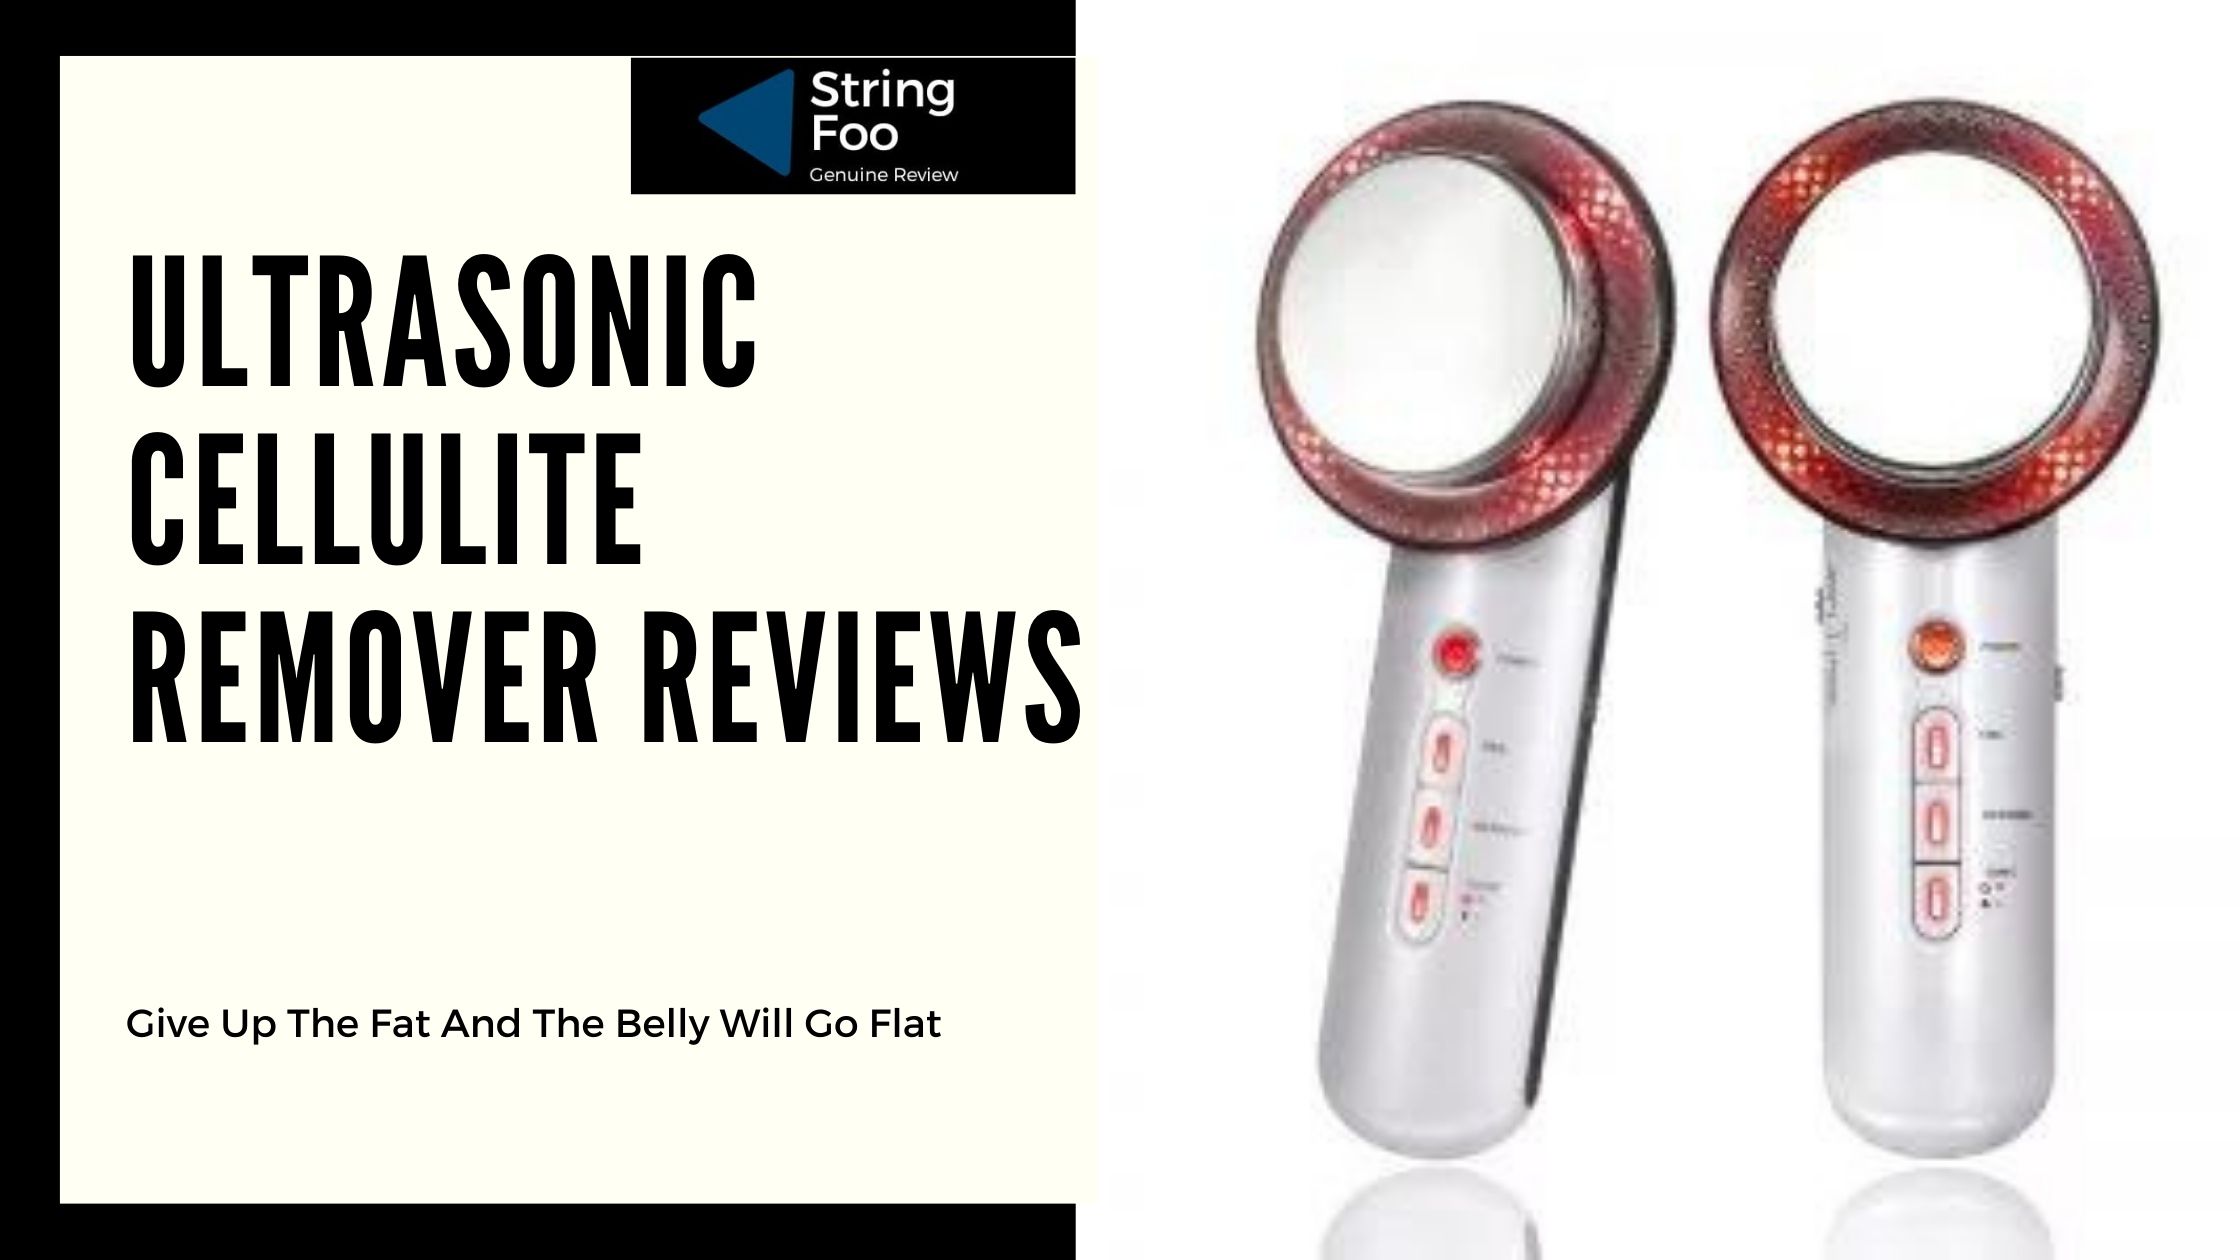 Ultrasonic Cellulite Remover Reviews